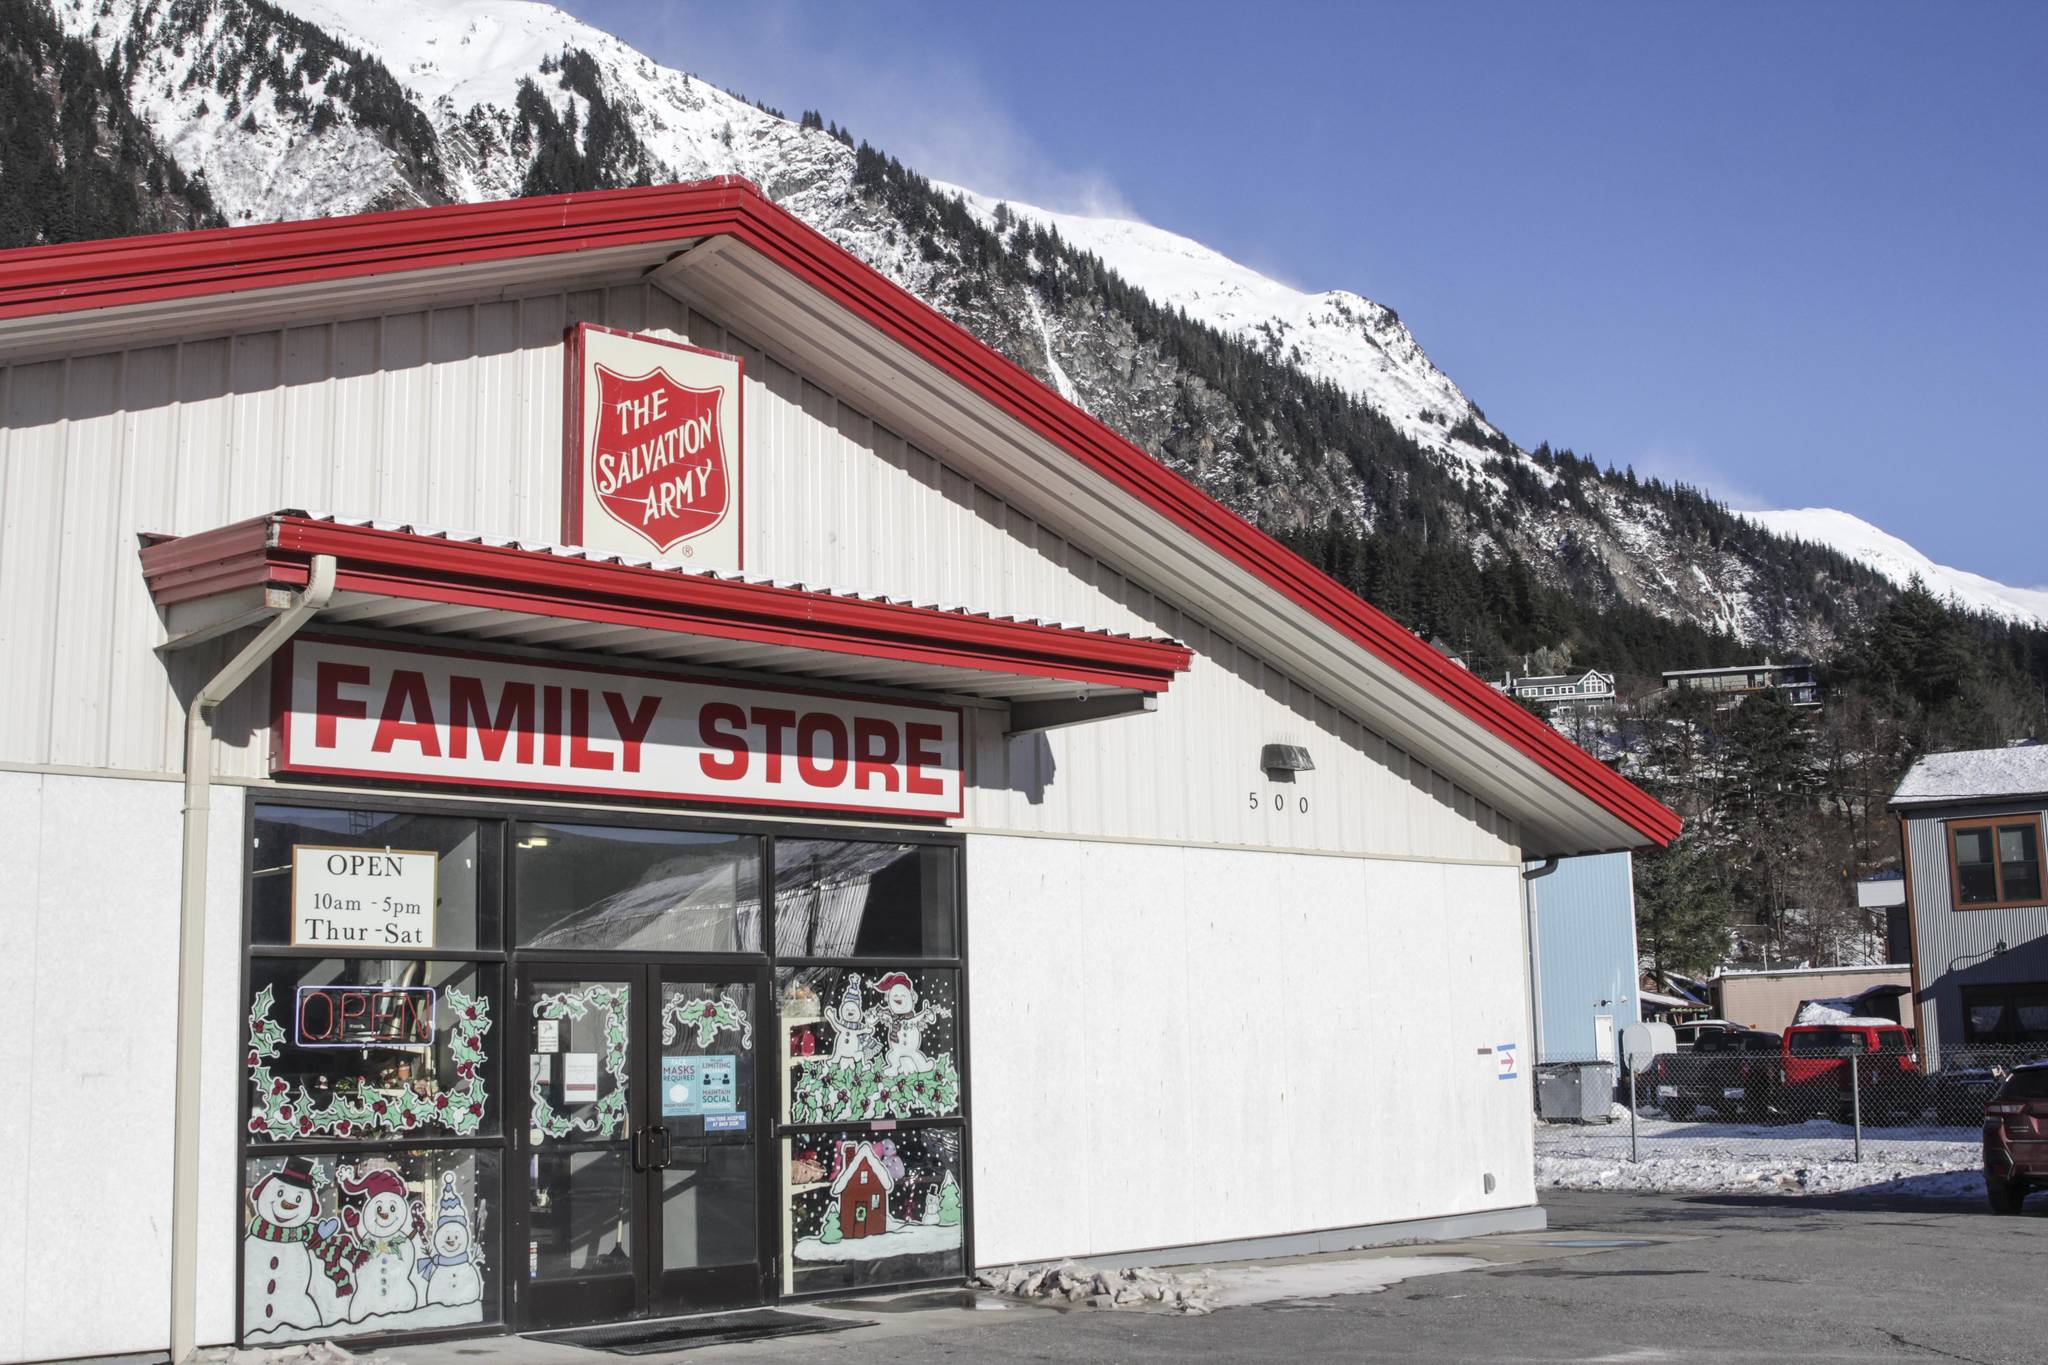 Juneau’s Salvation Army thrift store, shown here on Feb. 12, 2021, has been glanced but not stopped by the pandemic, a Salvation Army officer said. (Michael S. Lockett / Juneau Empire)